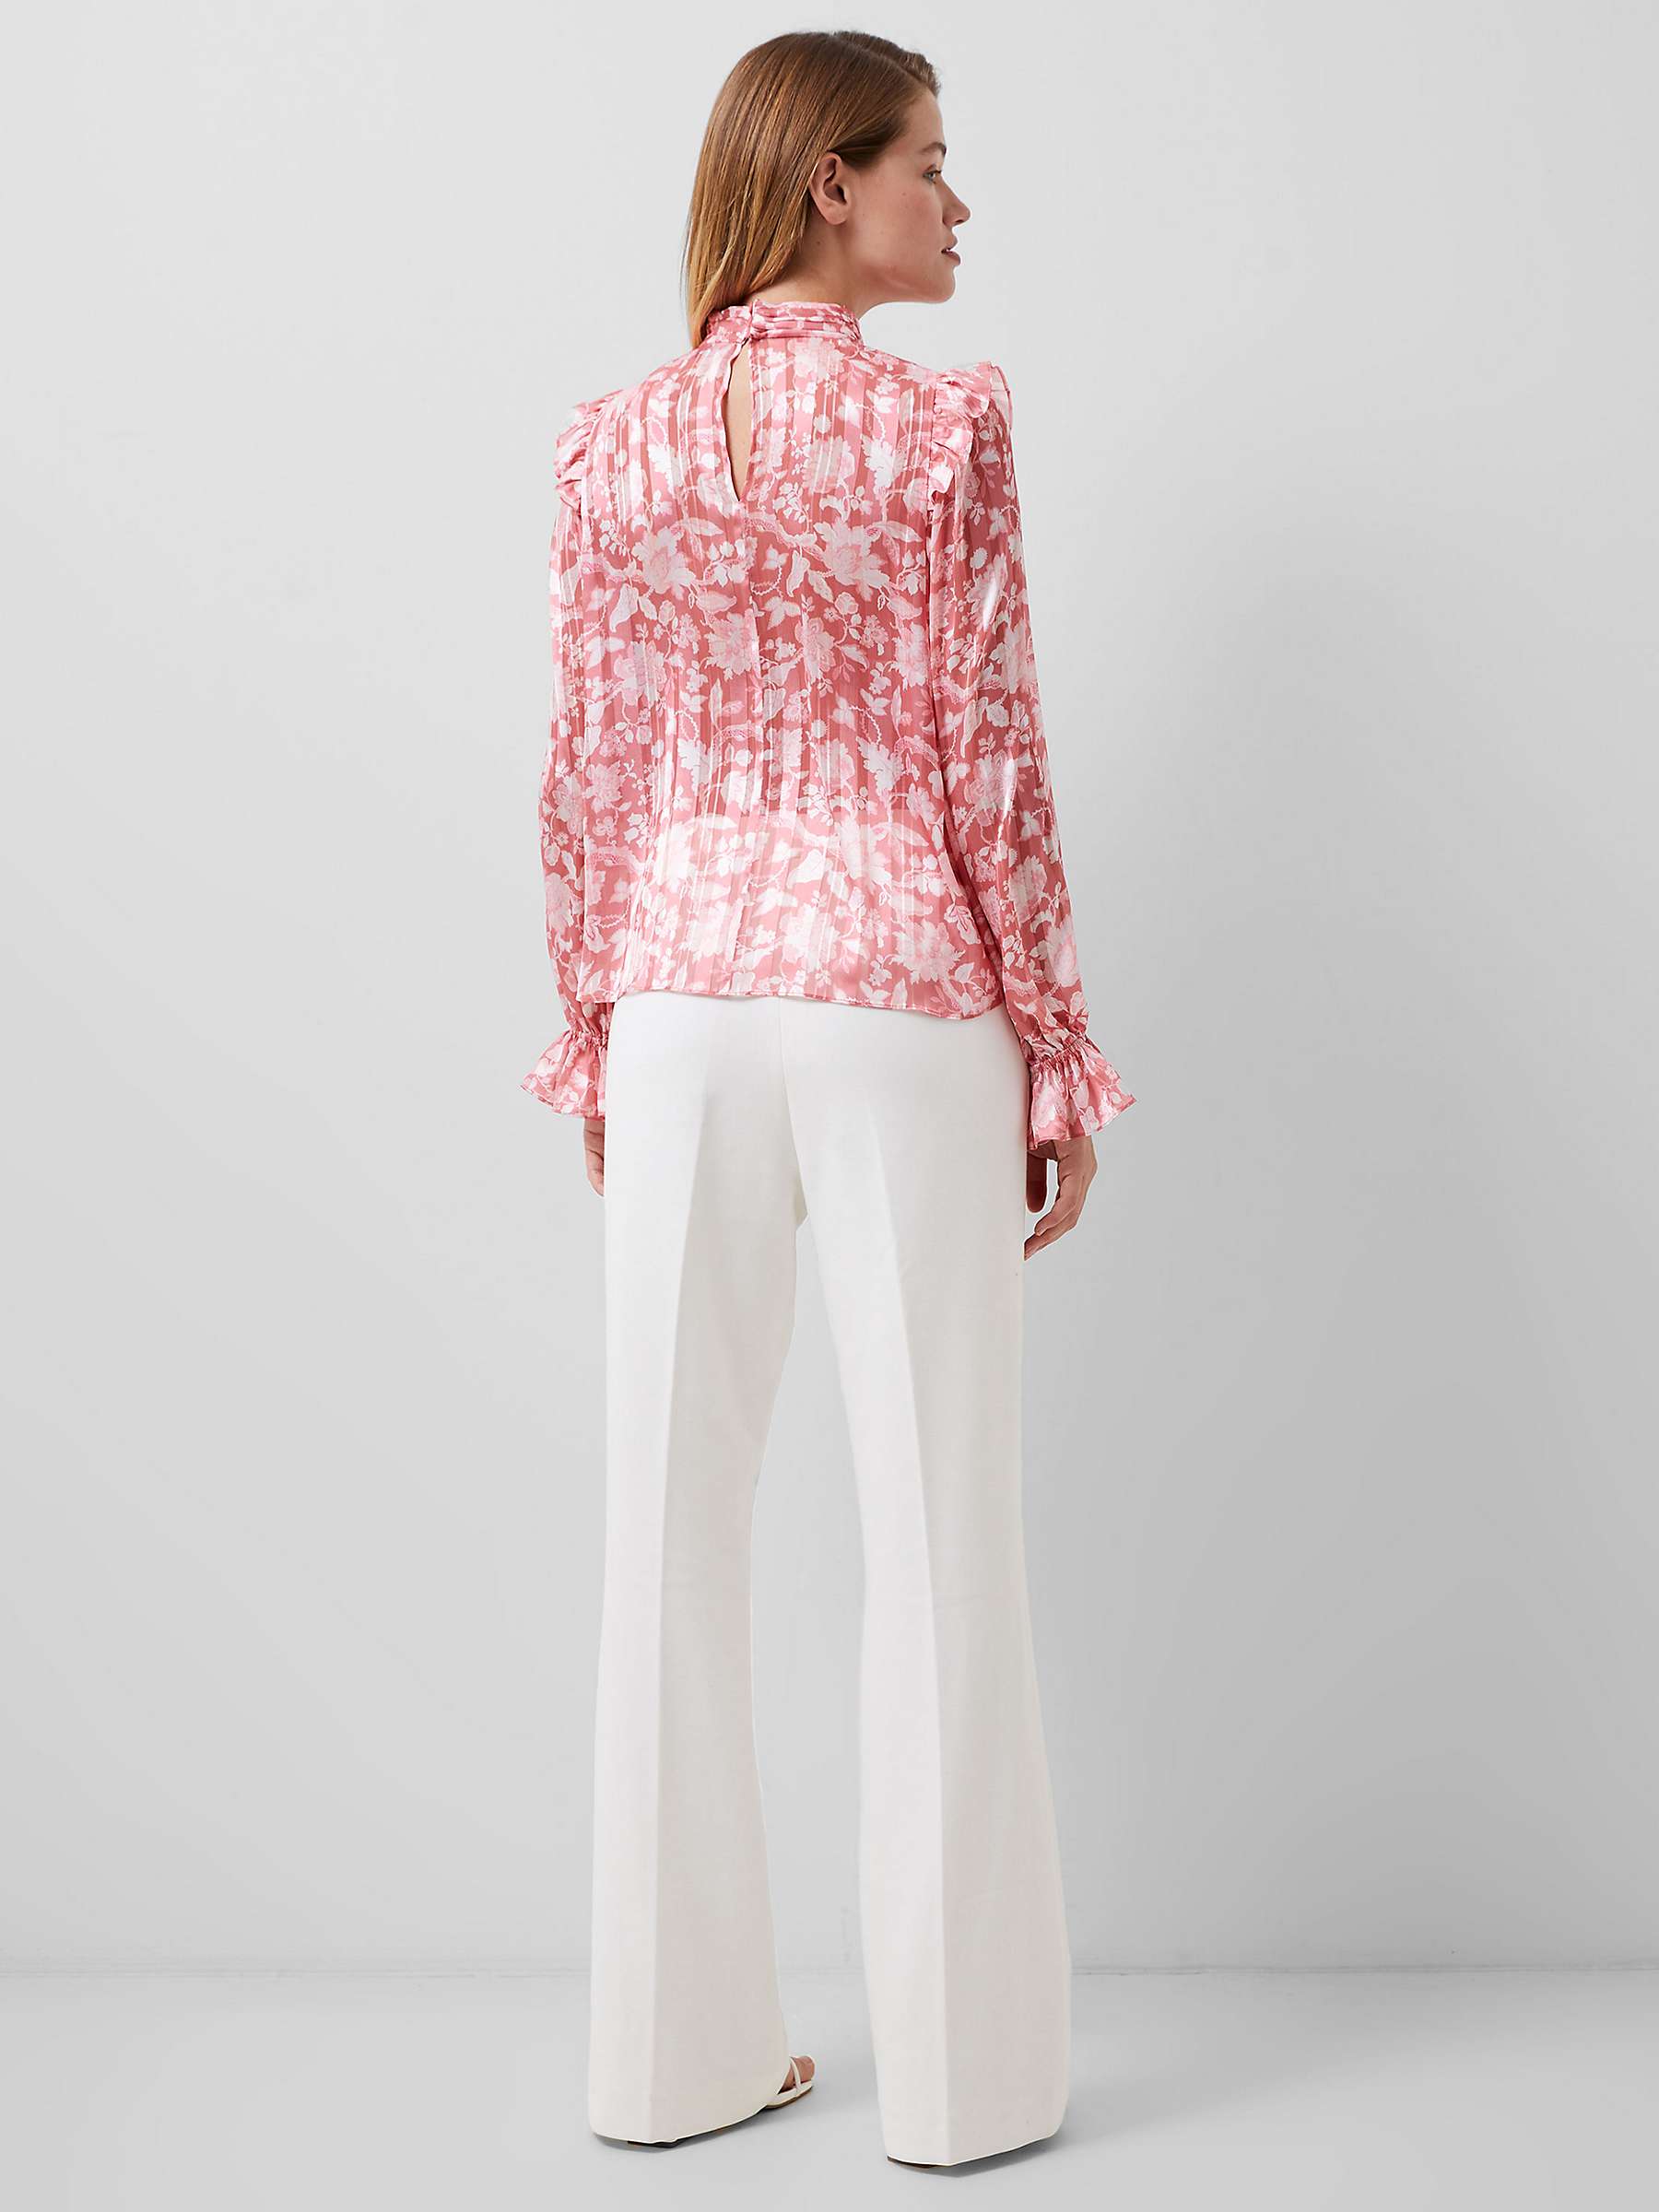 Buy French Connection Cynthia Fauna Blouse Online at johnlewis.com